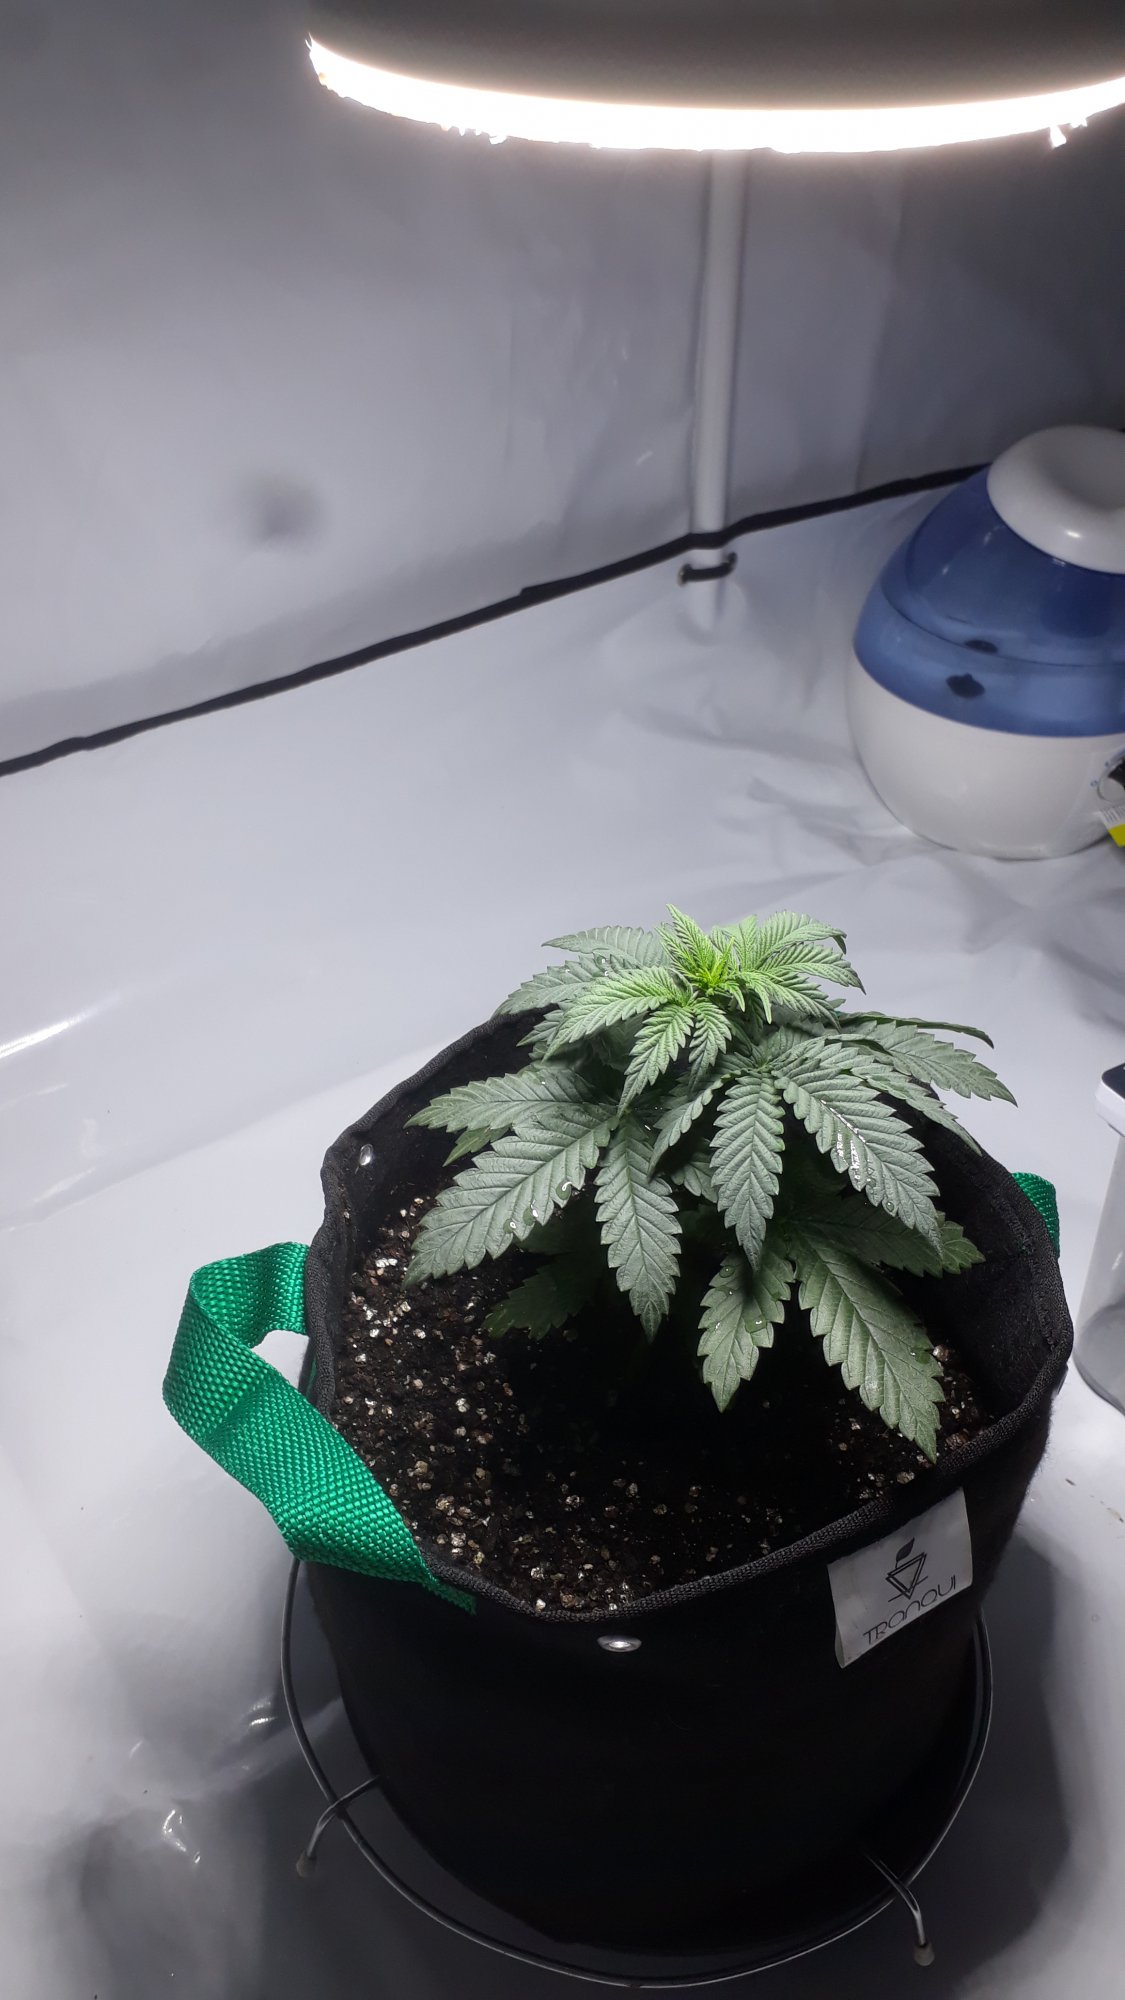 Help 1st time grower 1 month old plant small 3